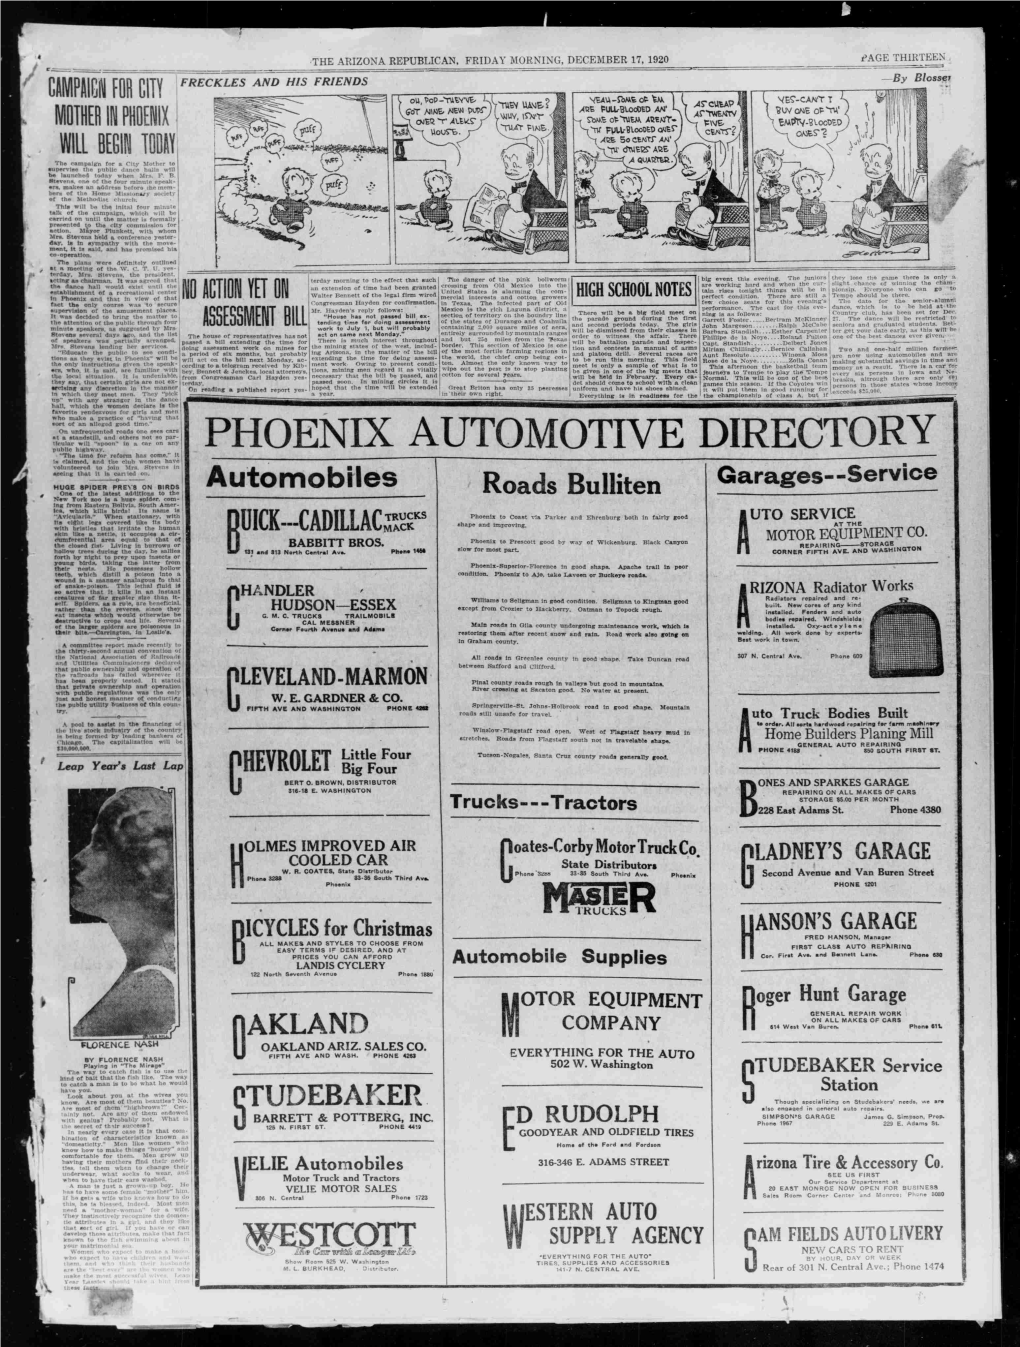 PHOENIX AUTOMOTIVE DIRECTORY "The Time for Reform Has Come," It Is Claimed, and the Club Women Have Volunteered to Join Mrs